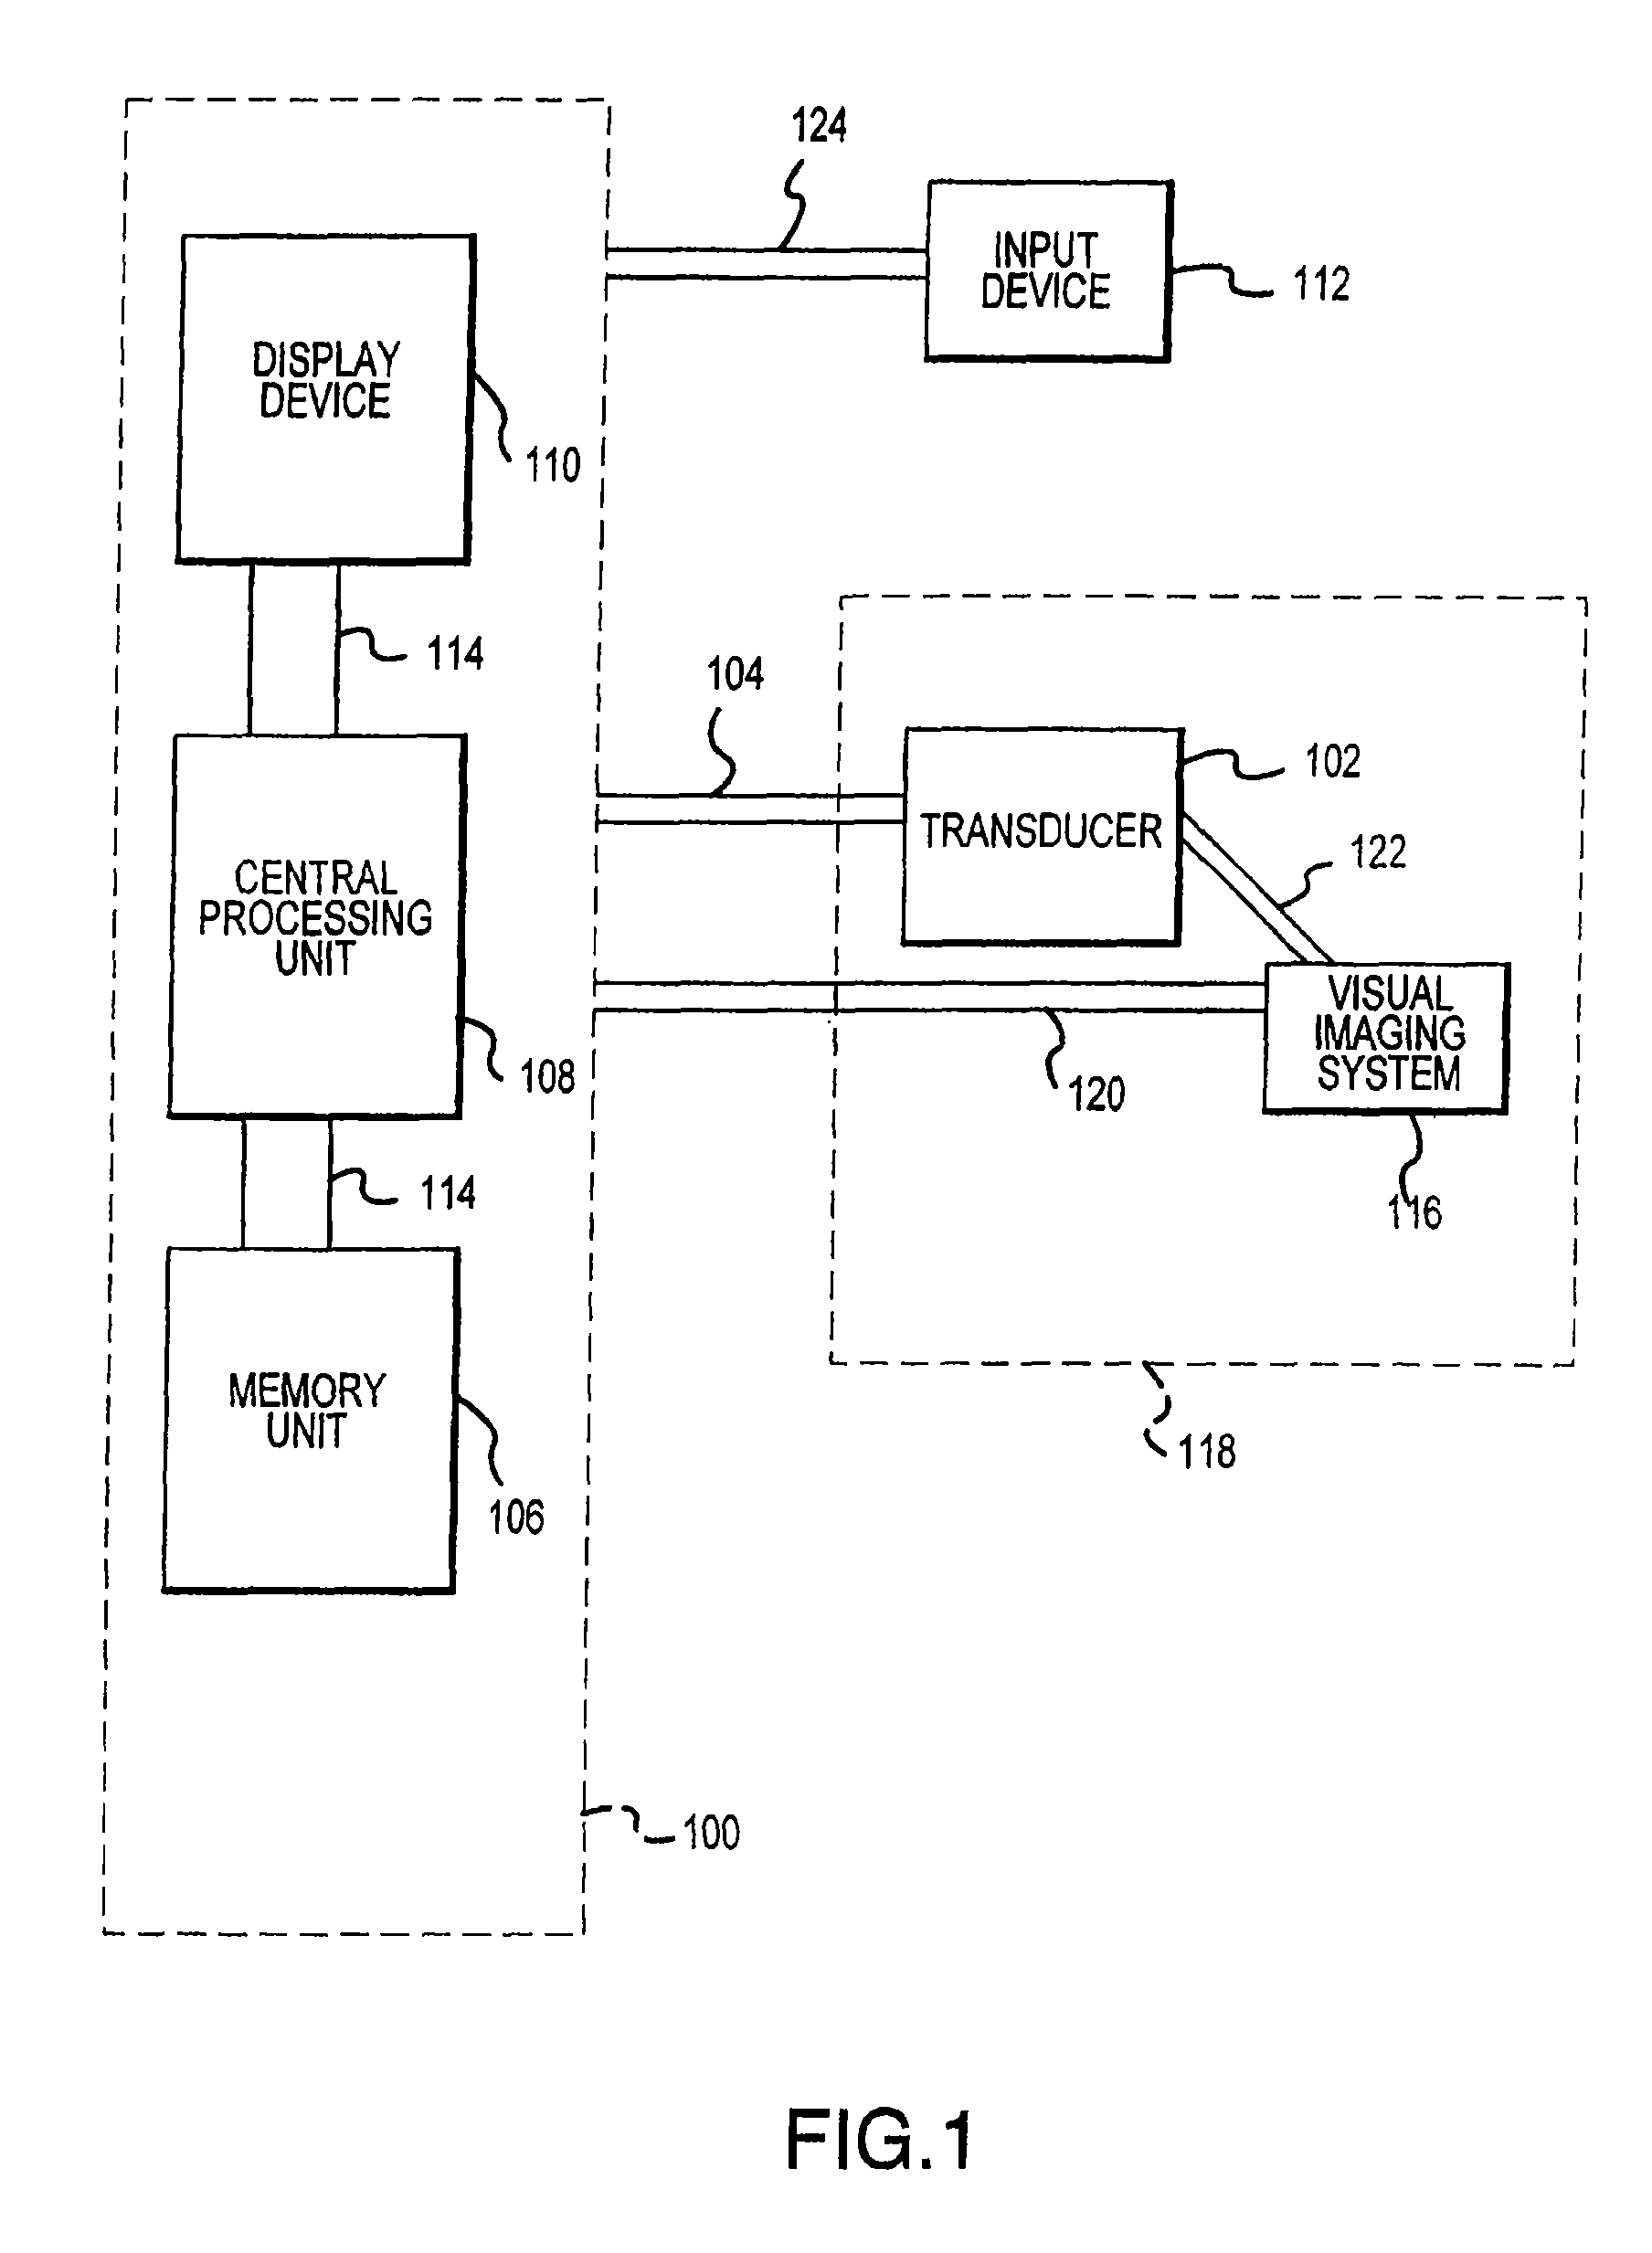 Visual imaging system for ultrasonic probe